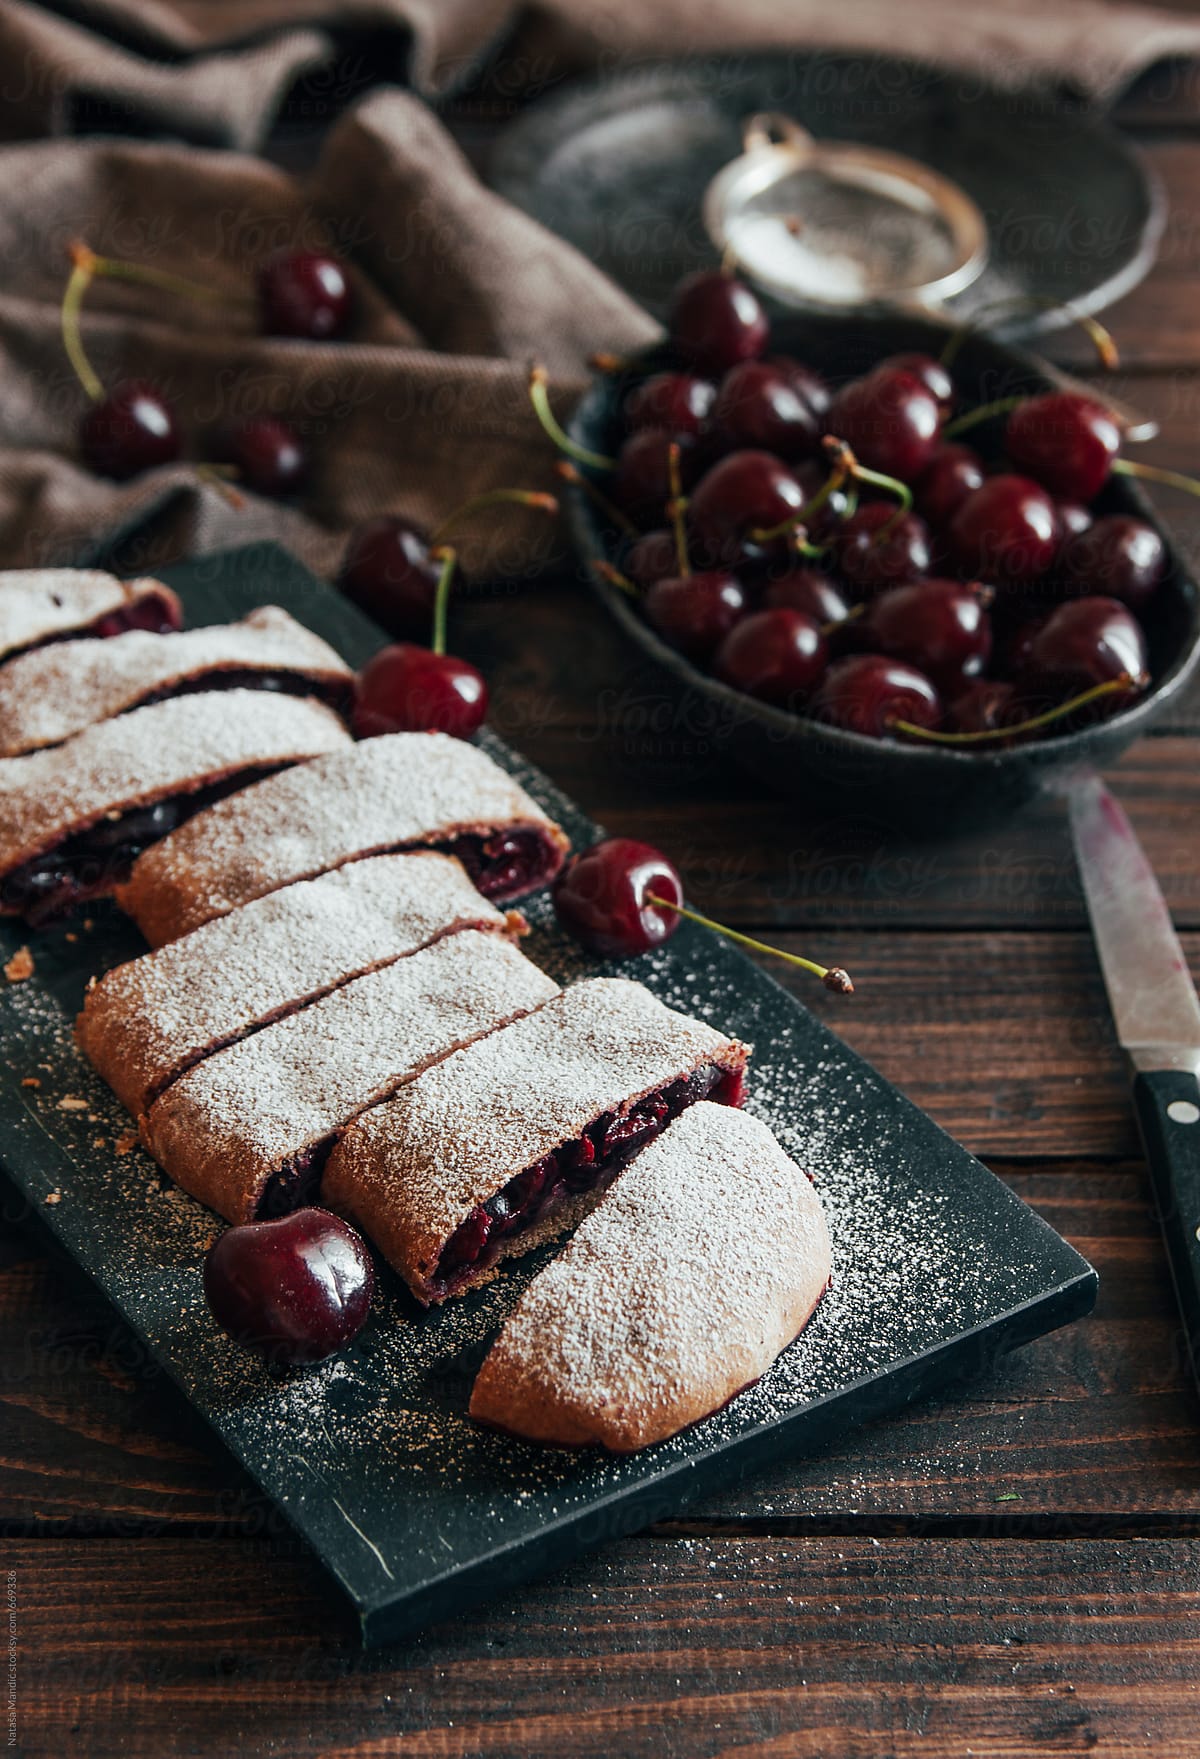 Delicious strudel with cherries